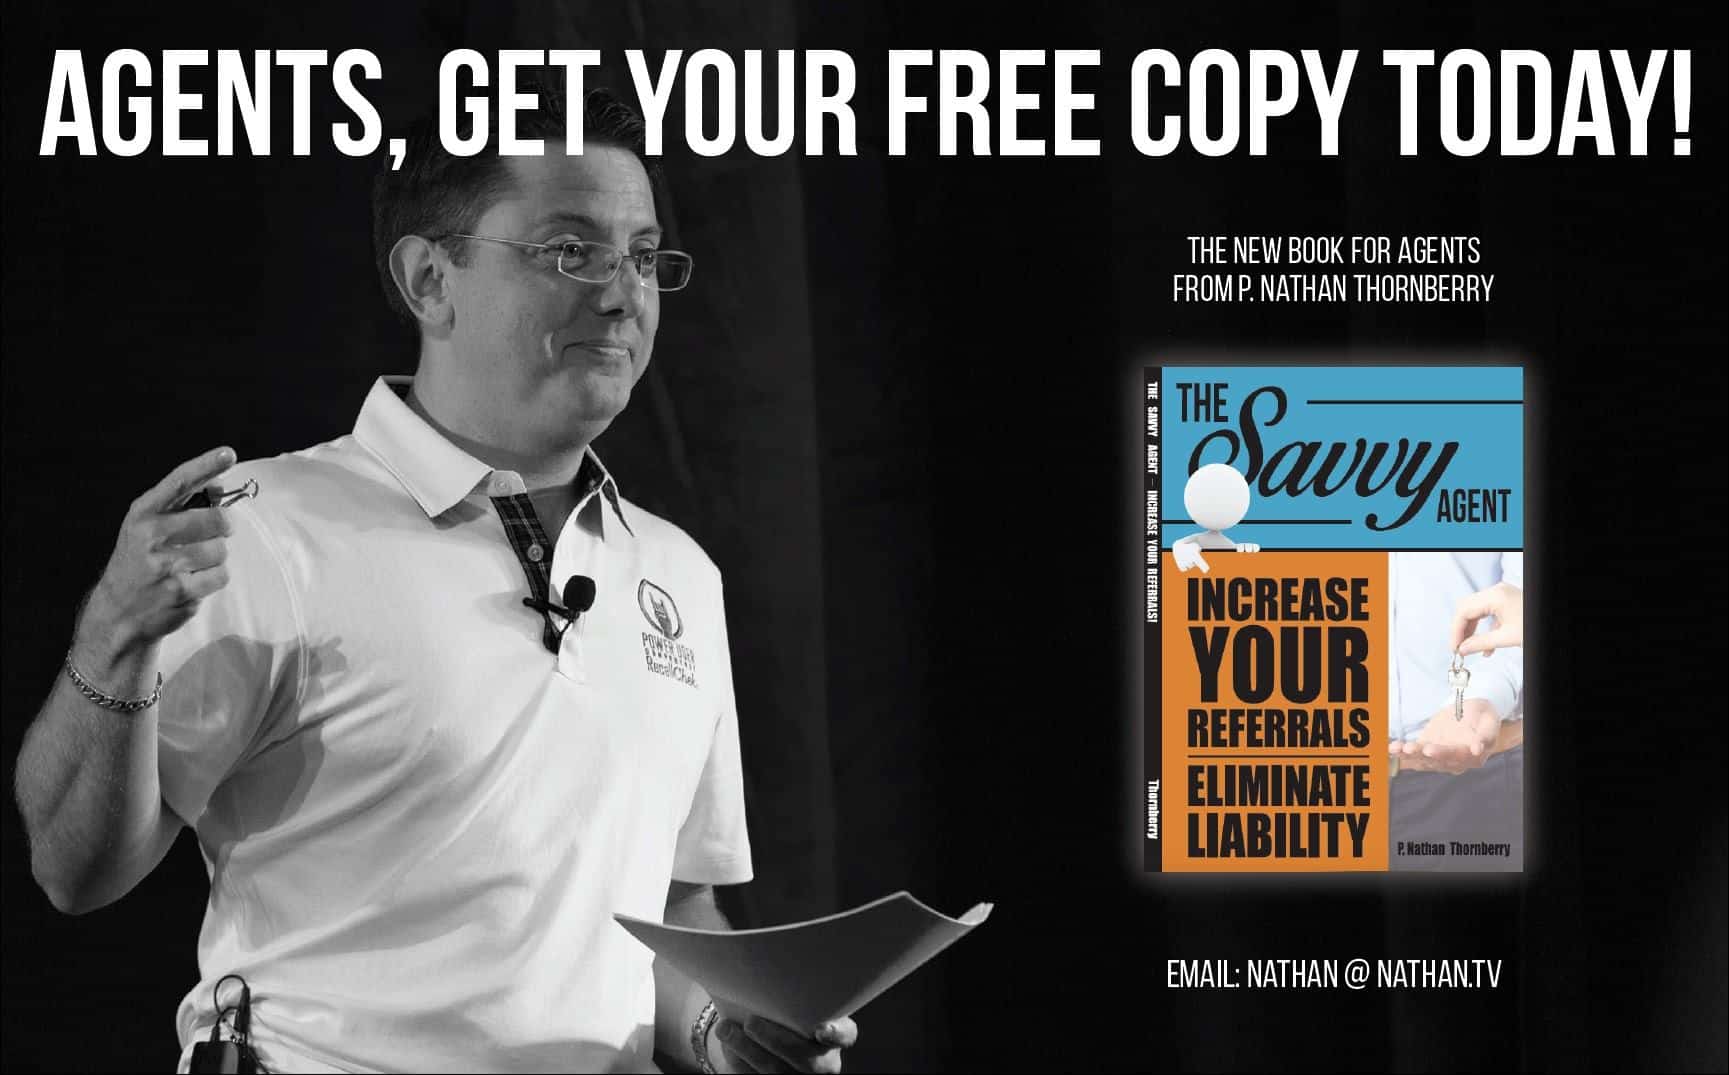 The Savvy Agent: Increase Your Referrals, Eliminate Liability by Nathan Thornberry